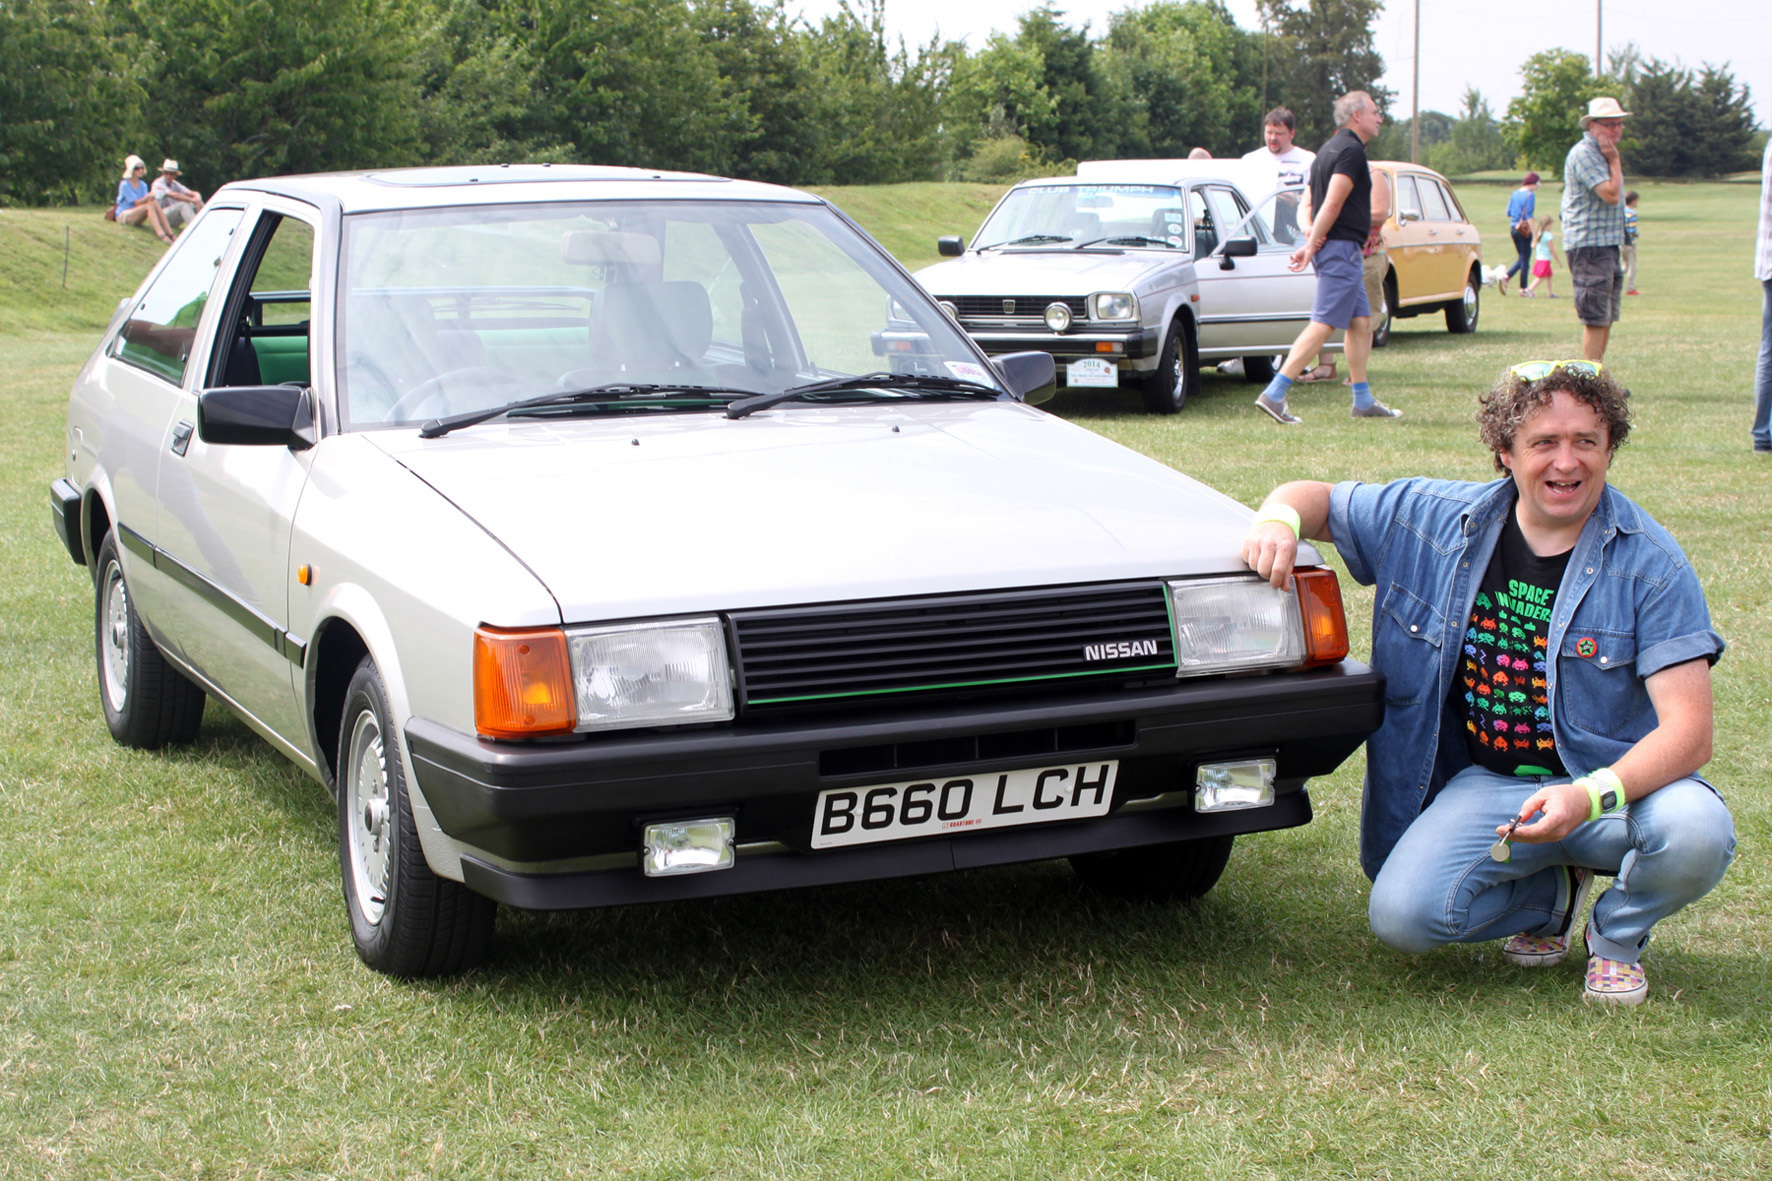 1985 Nissan Cherry Europe, with owner Ed Rattley